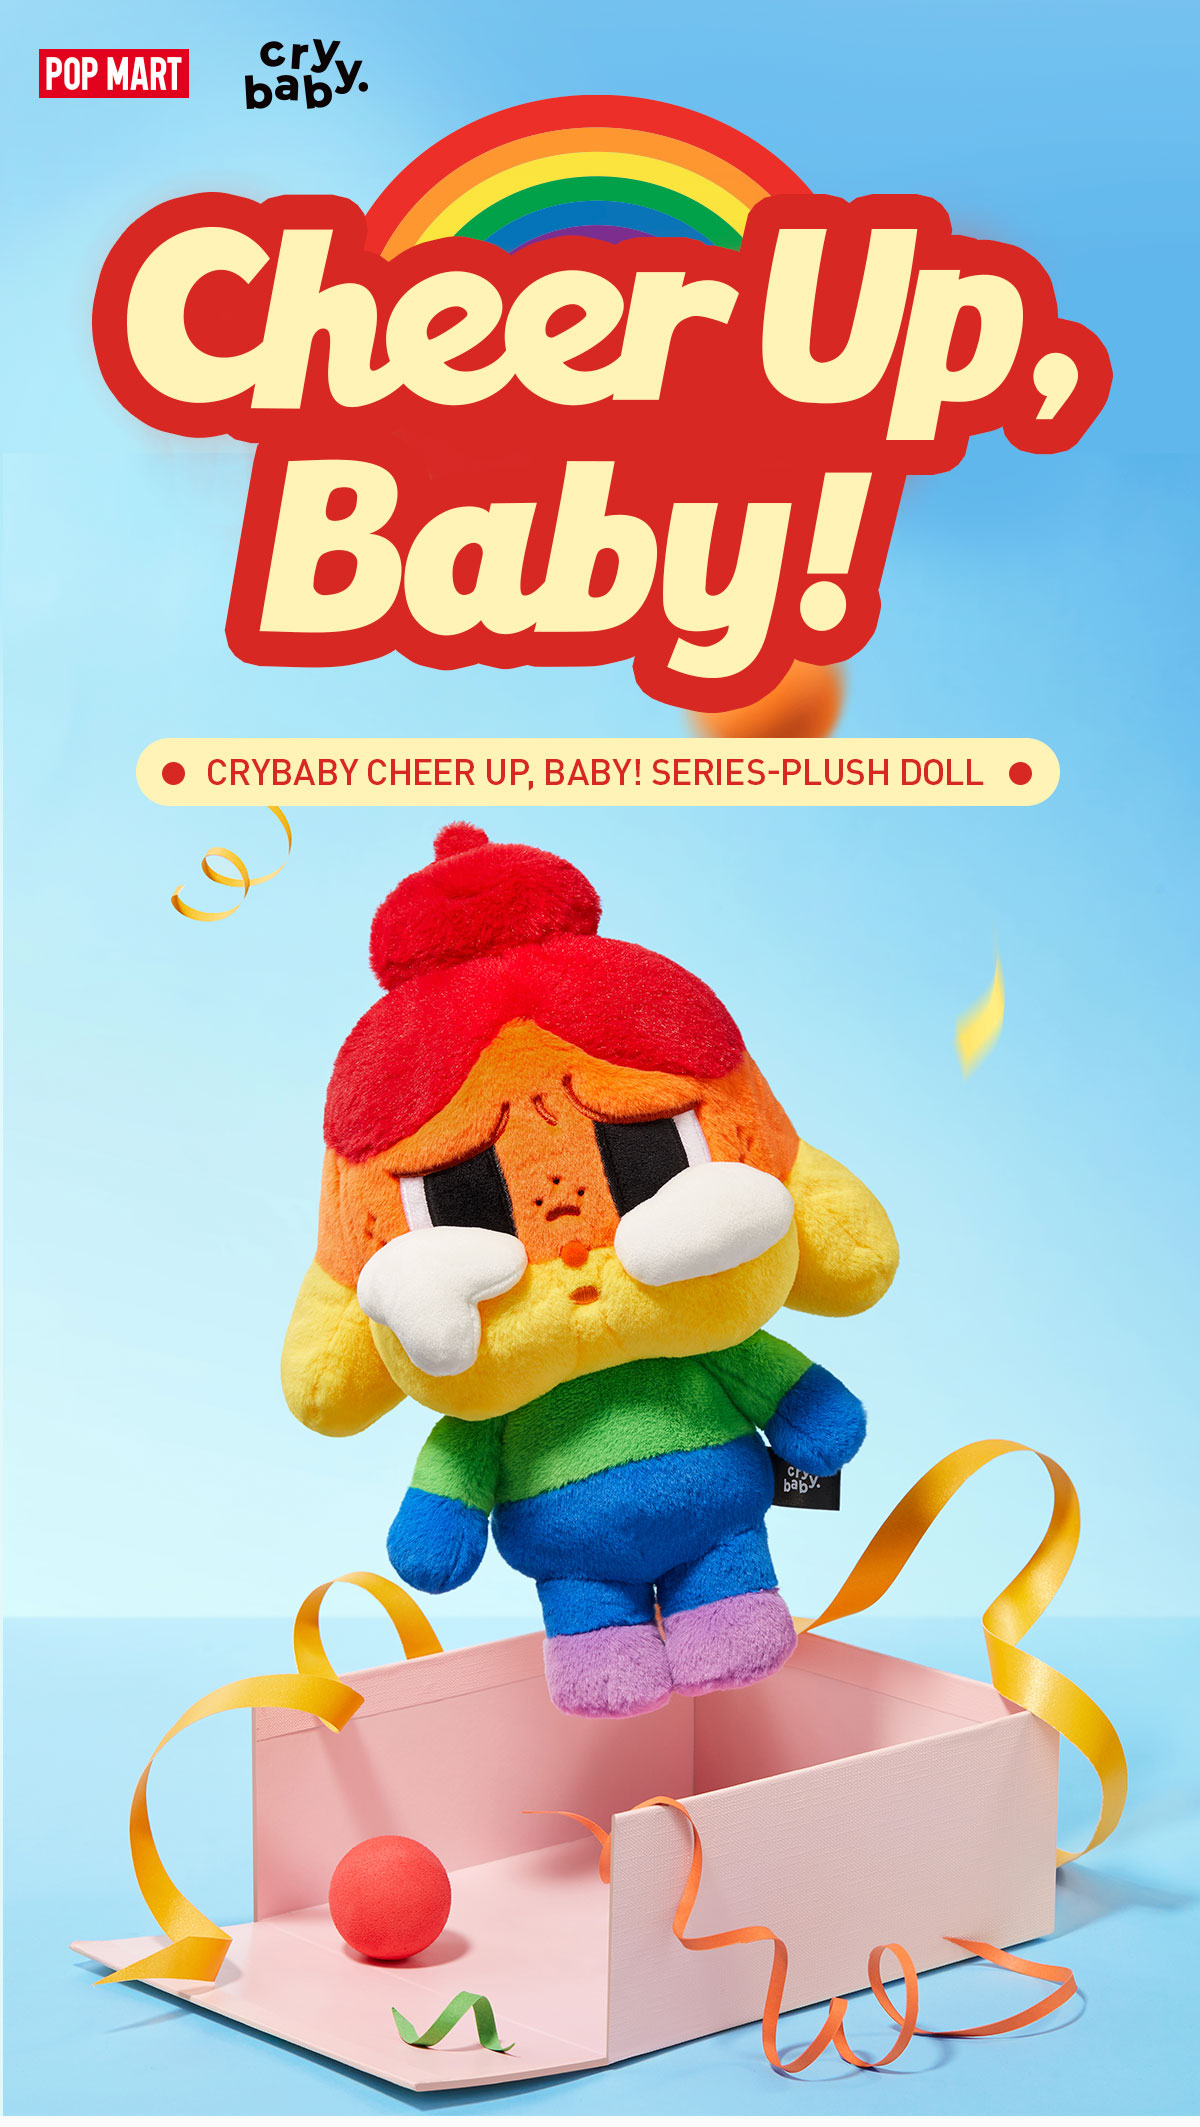 CRYBABY CHEER UP, BABY! SERIES-Plush Doll - POP MART (United States)